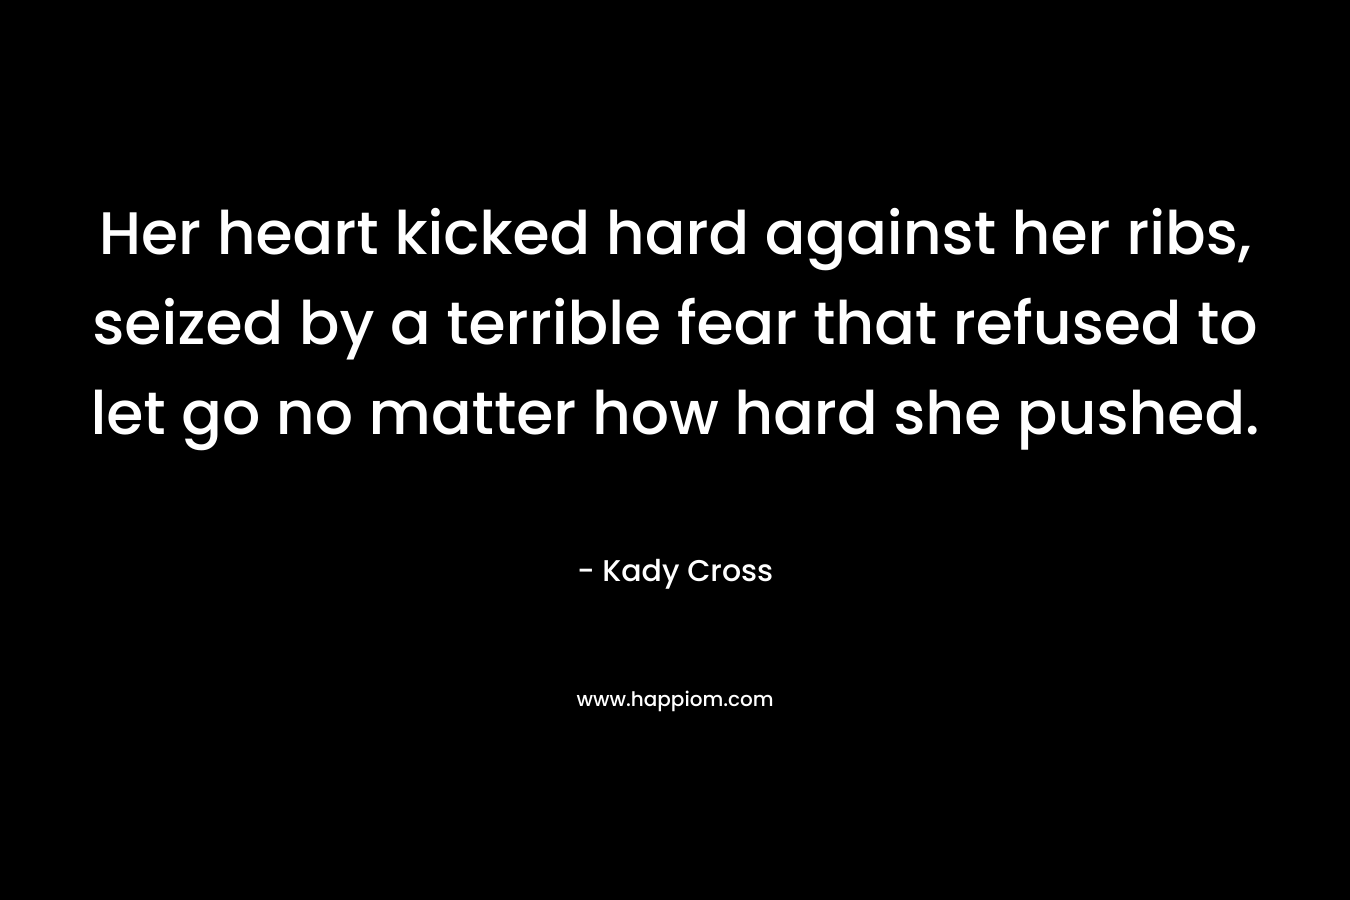 Her heart kicked hard against her ribs, seized by a terrible fear that refused to let go no matter how hard she pushed.